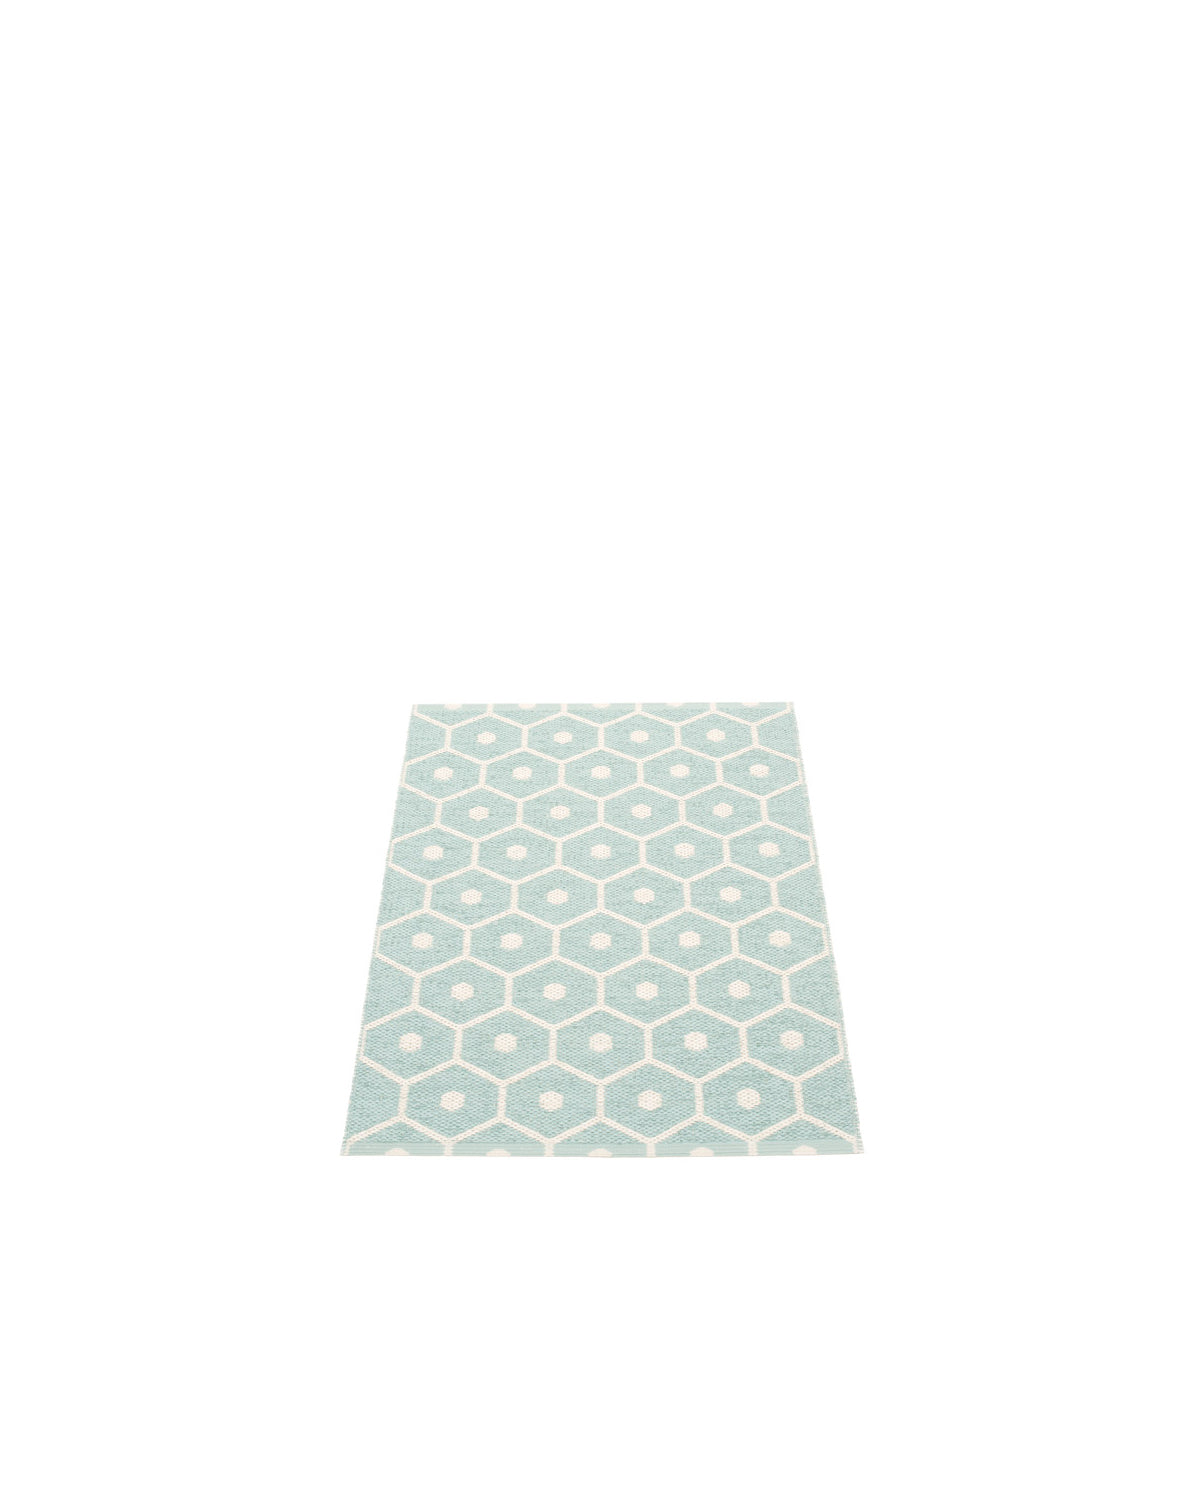 Pappelina Rug HONEY Pale Turquoise  image 5